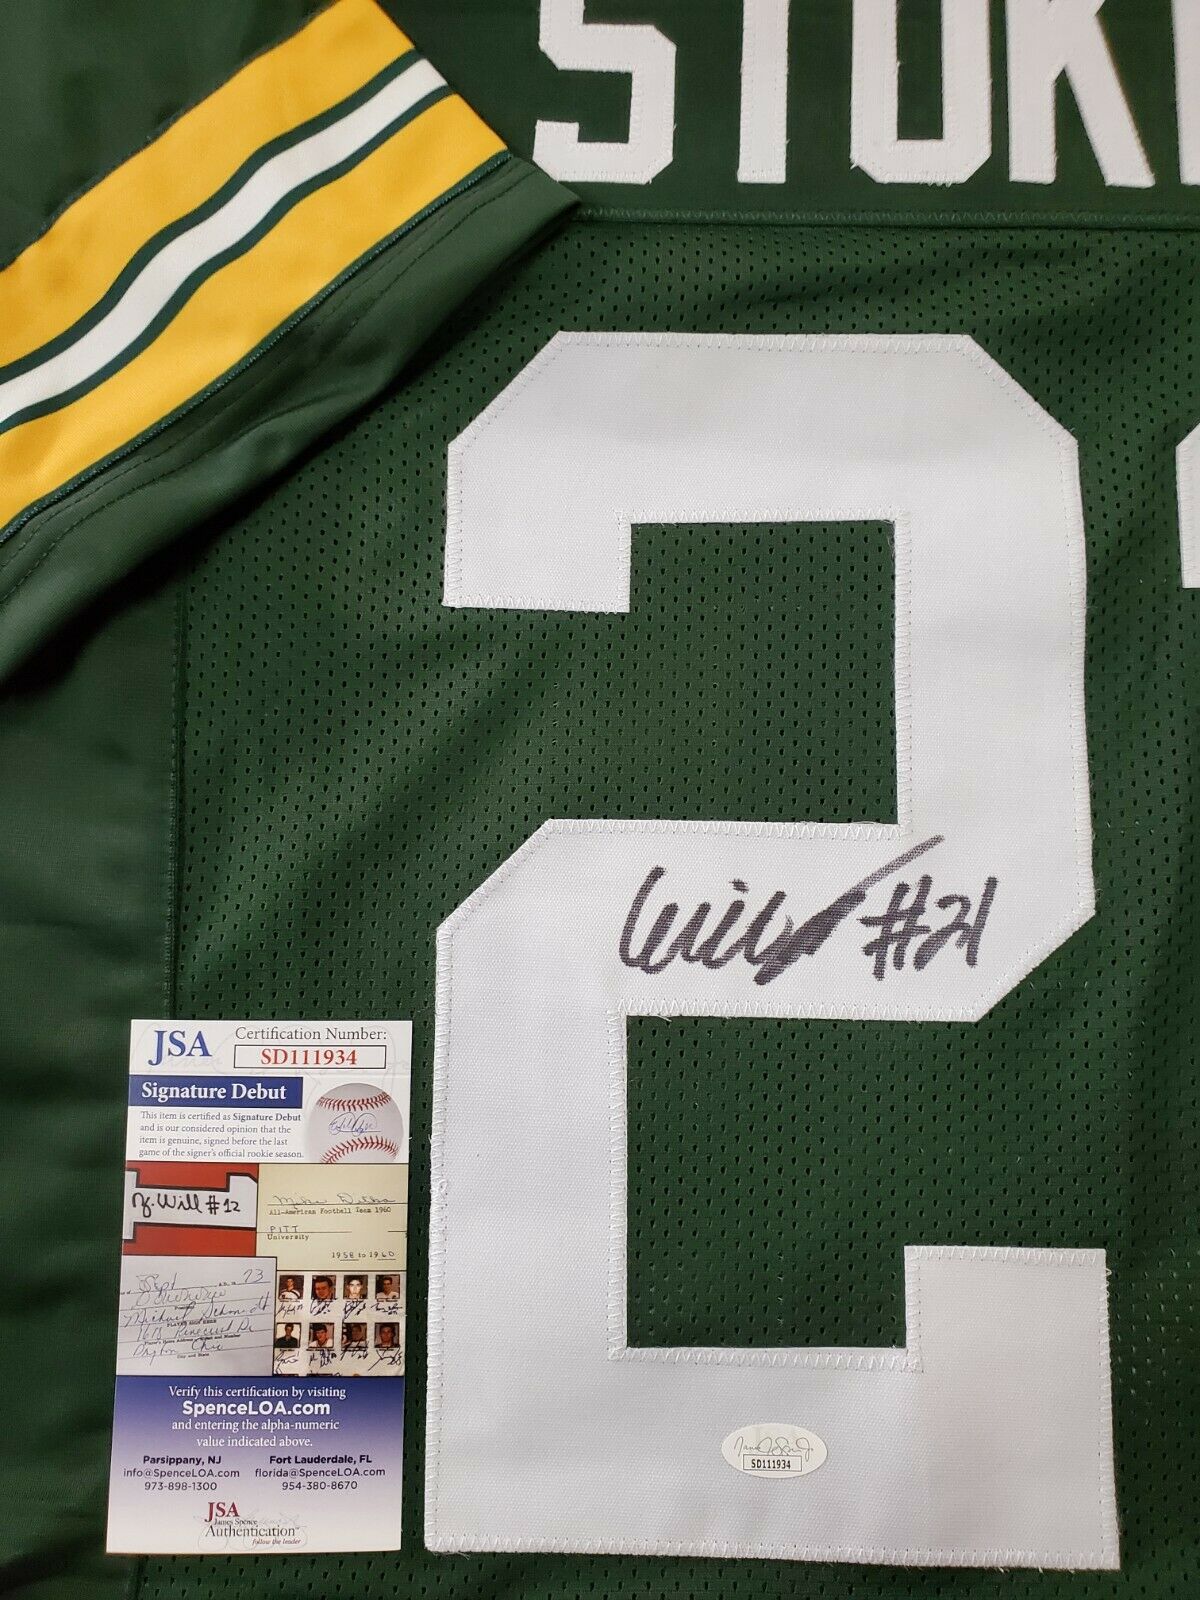 MVP Authentics Green Bay Packers Eric Stokes Autographed Signed Jersey Jsa Coa 117 sports jersey framing , jersey framing